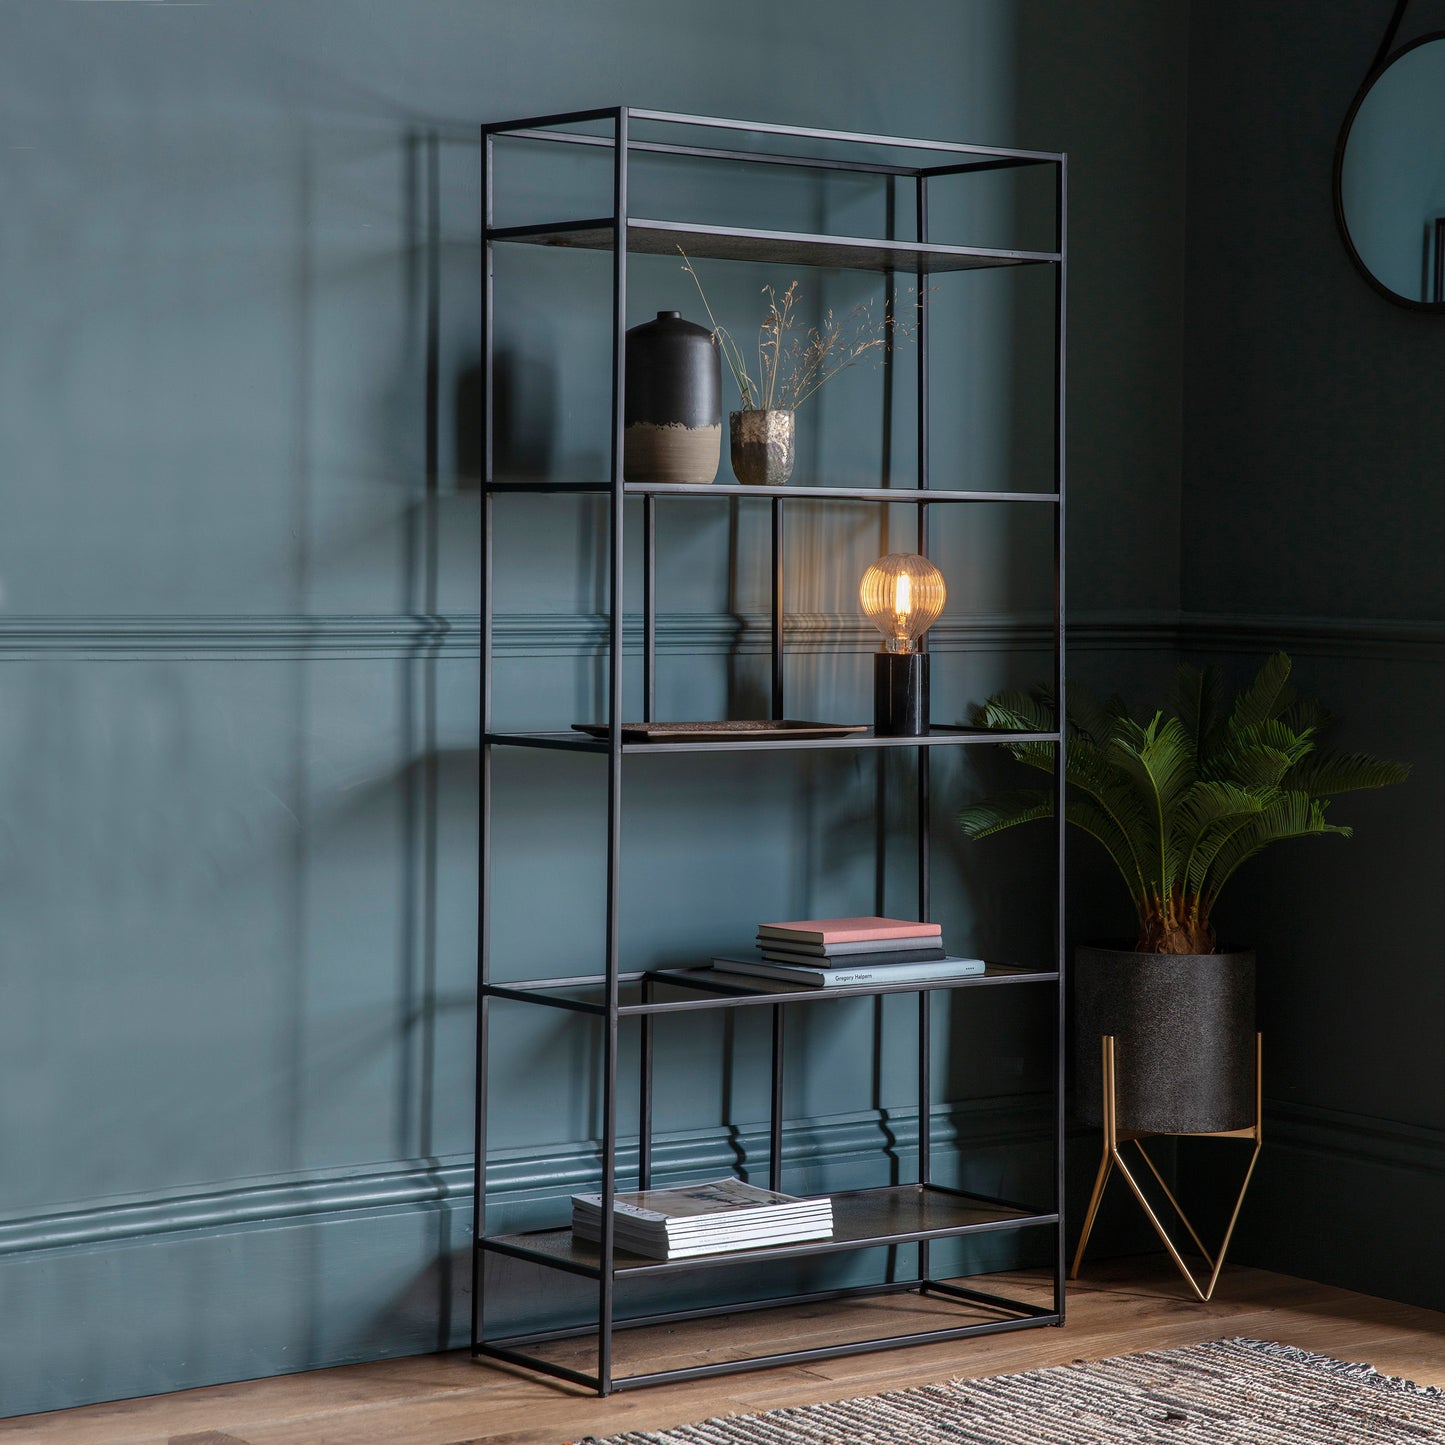 A Home furniture display unit in an antique gold finish by Kikiathome.co.uk showcasing interior decor on blue walls.